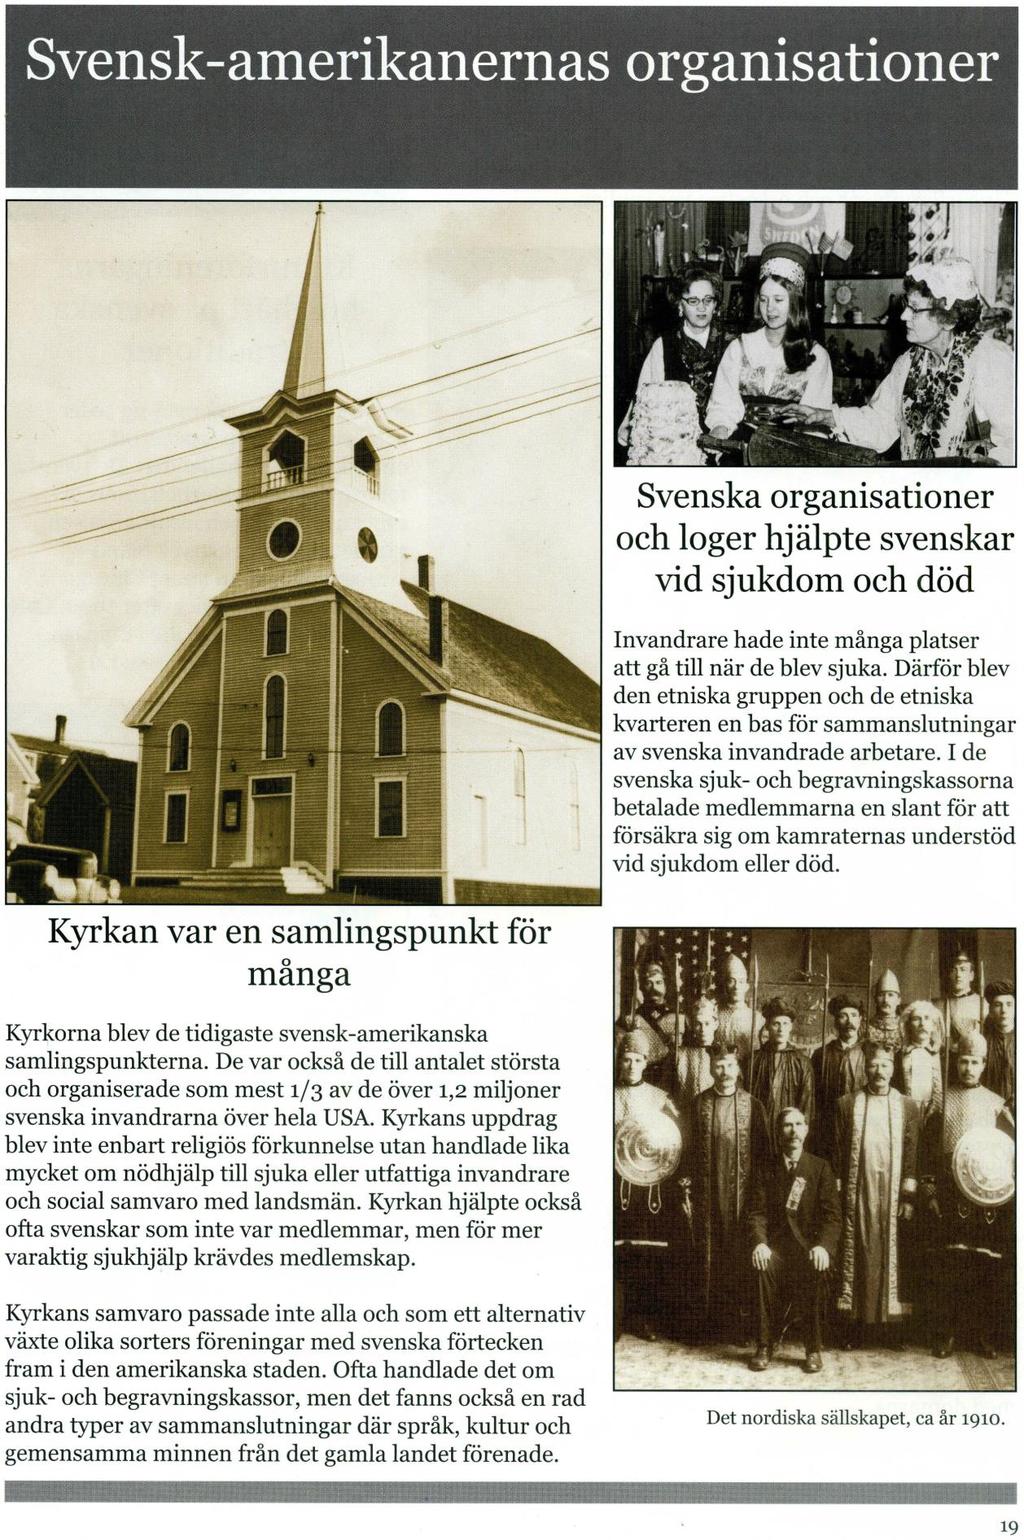 Swedish-American organizations Swedish organizations and lodges helped Swedes when ill and at death Immigrants didn't have many places to turn to when they became ill.